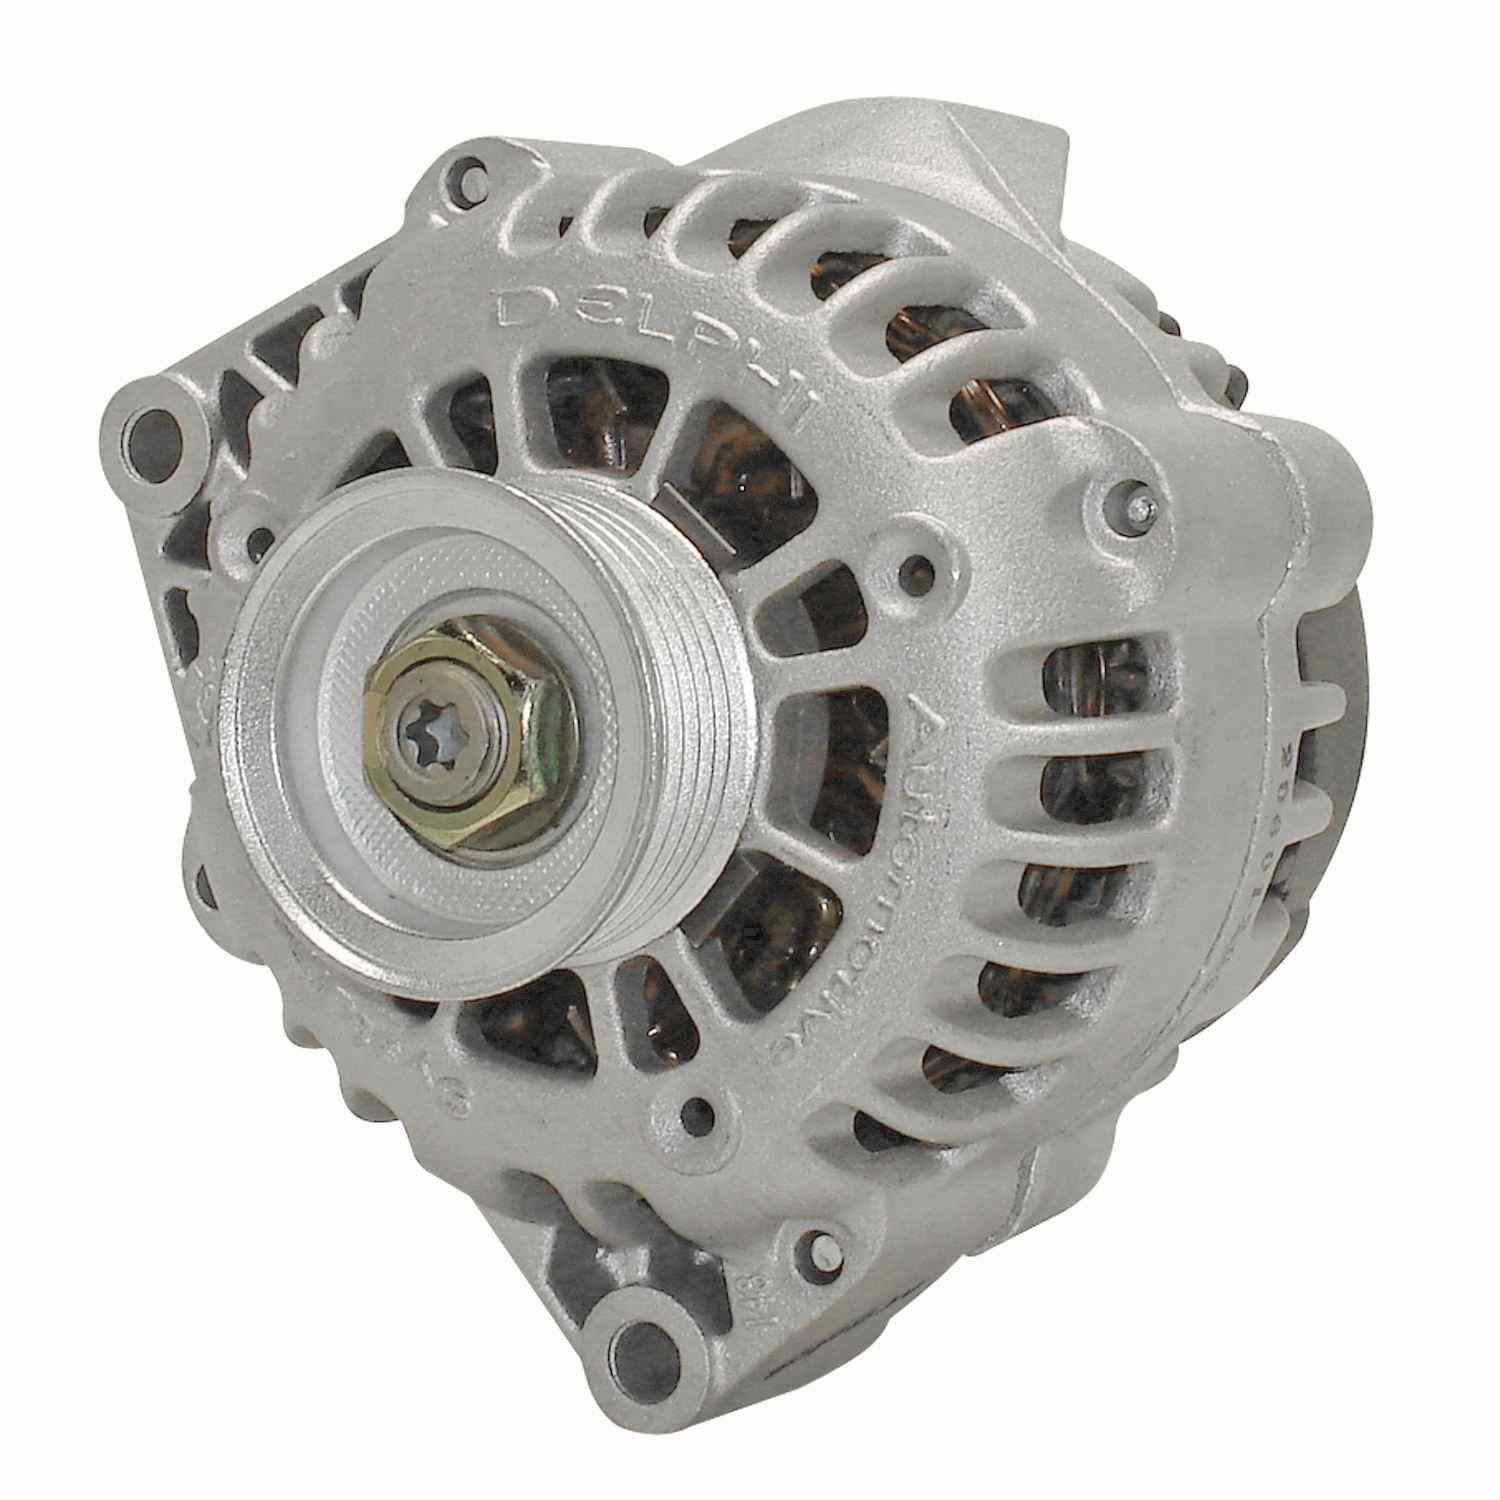 ACDELCO GOLD/PROFESSIONAL - Reman Alternator - DCC 334-2454A